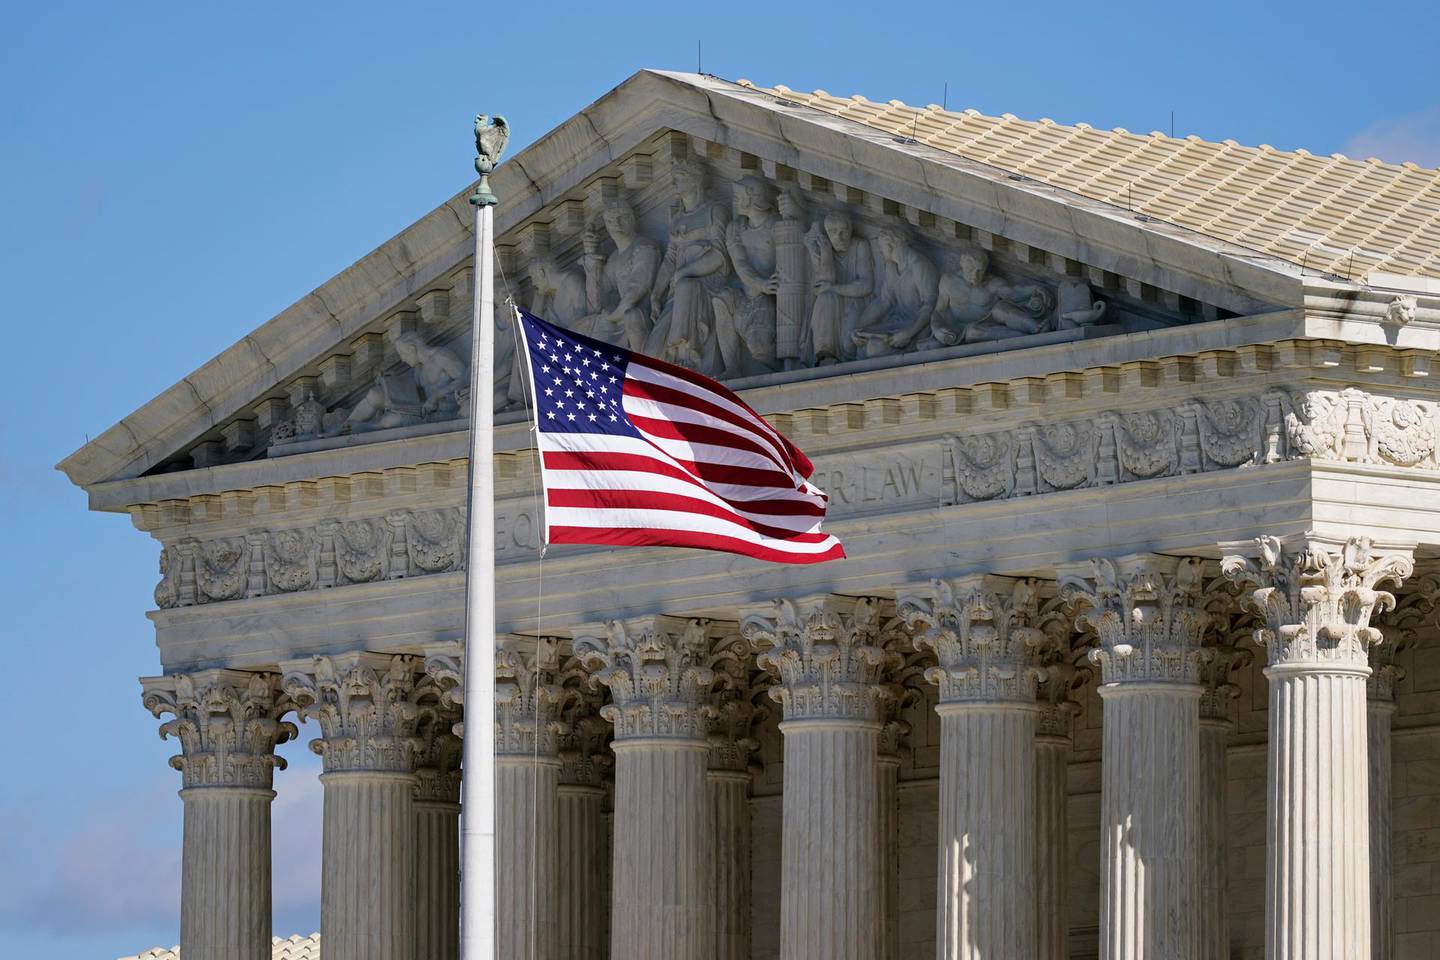 FILE - In this Nov. 2, 2020, file photo an American flag waves in front of the Supreme Court building on Capitol Hill in Washington. The Supreme Court is hearing arguments over whether the Trump administration can exclude people in the country illegally from the count used for divvying up congressional seats. (AP Photo/Patrick Semansky, File)